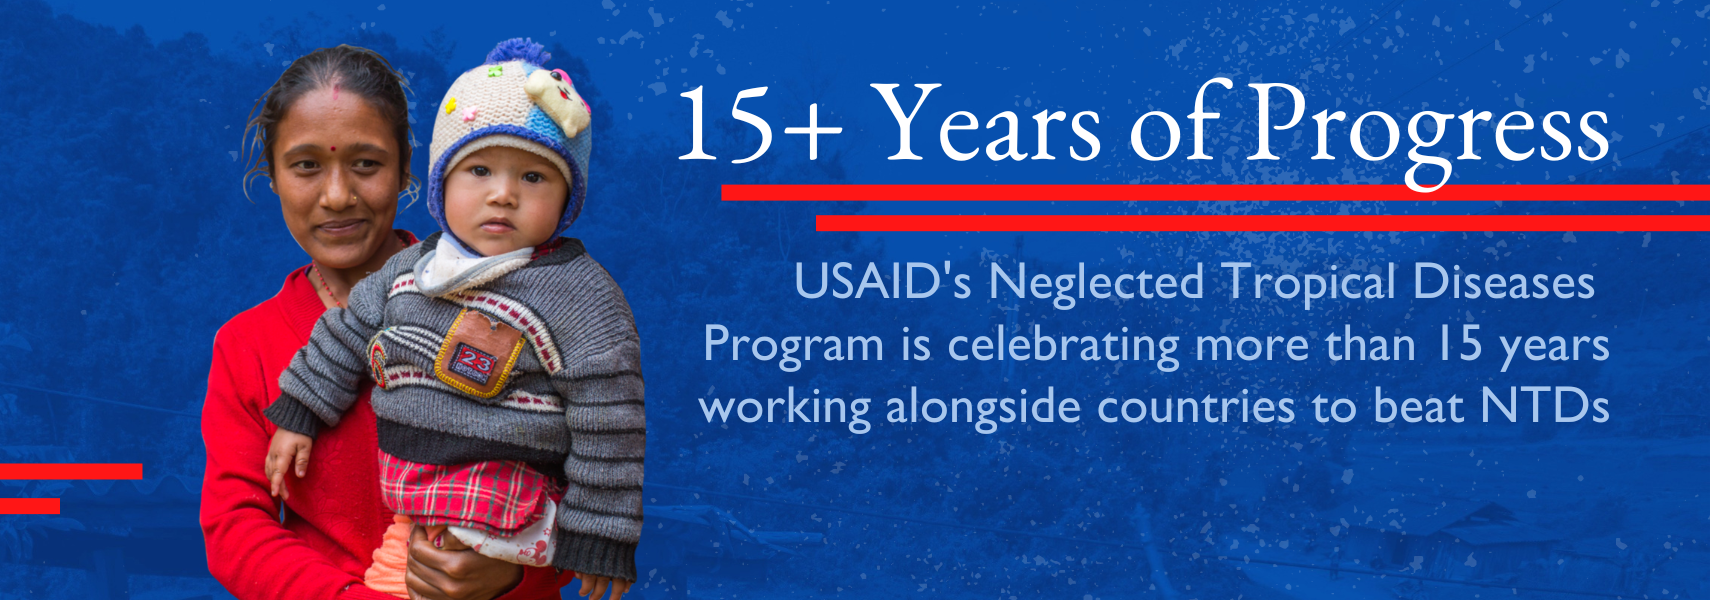 15 plus Years of Progress Fighting Neglected Tropical Diseases